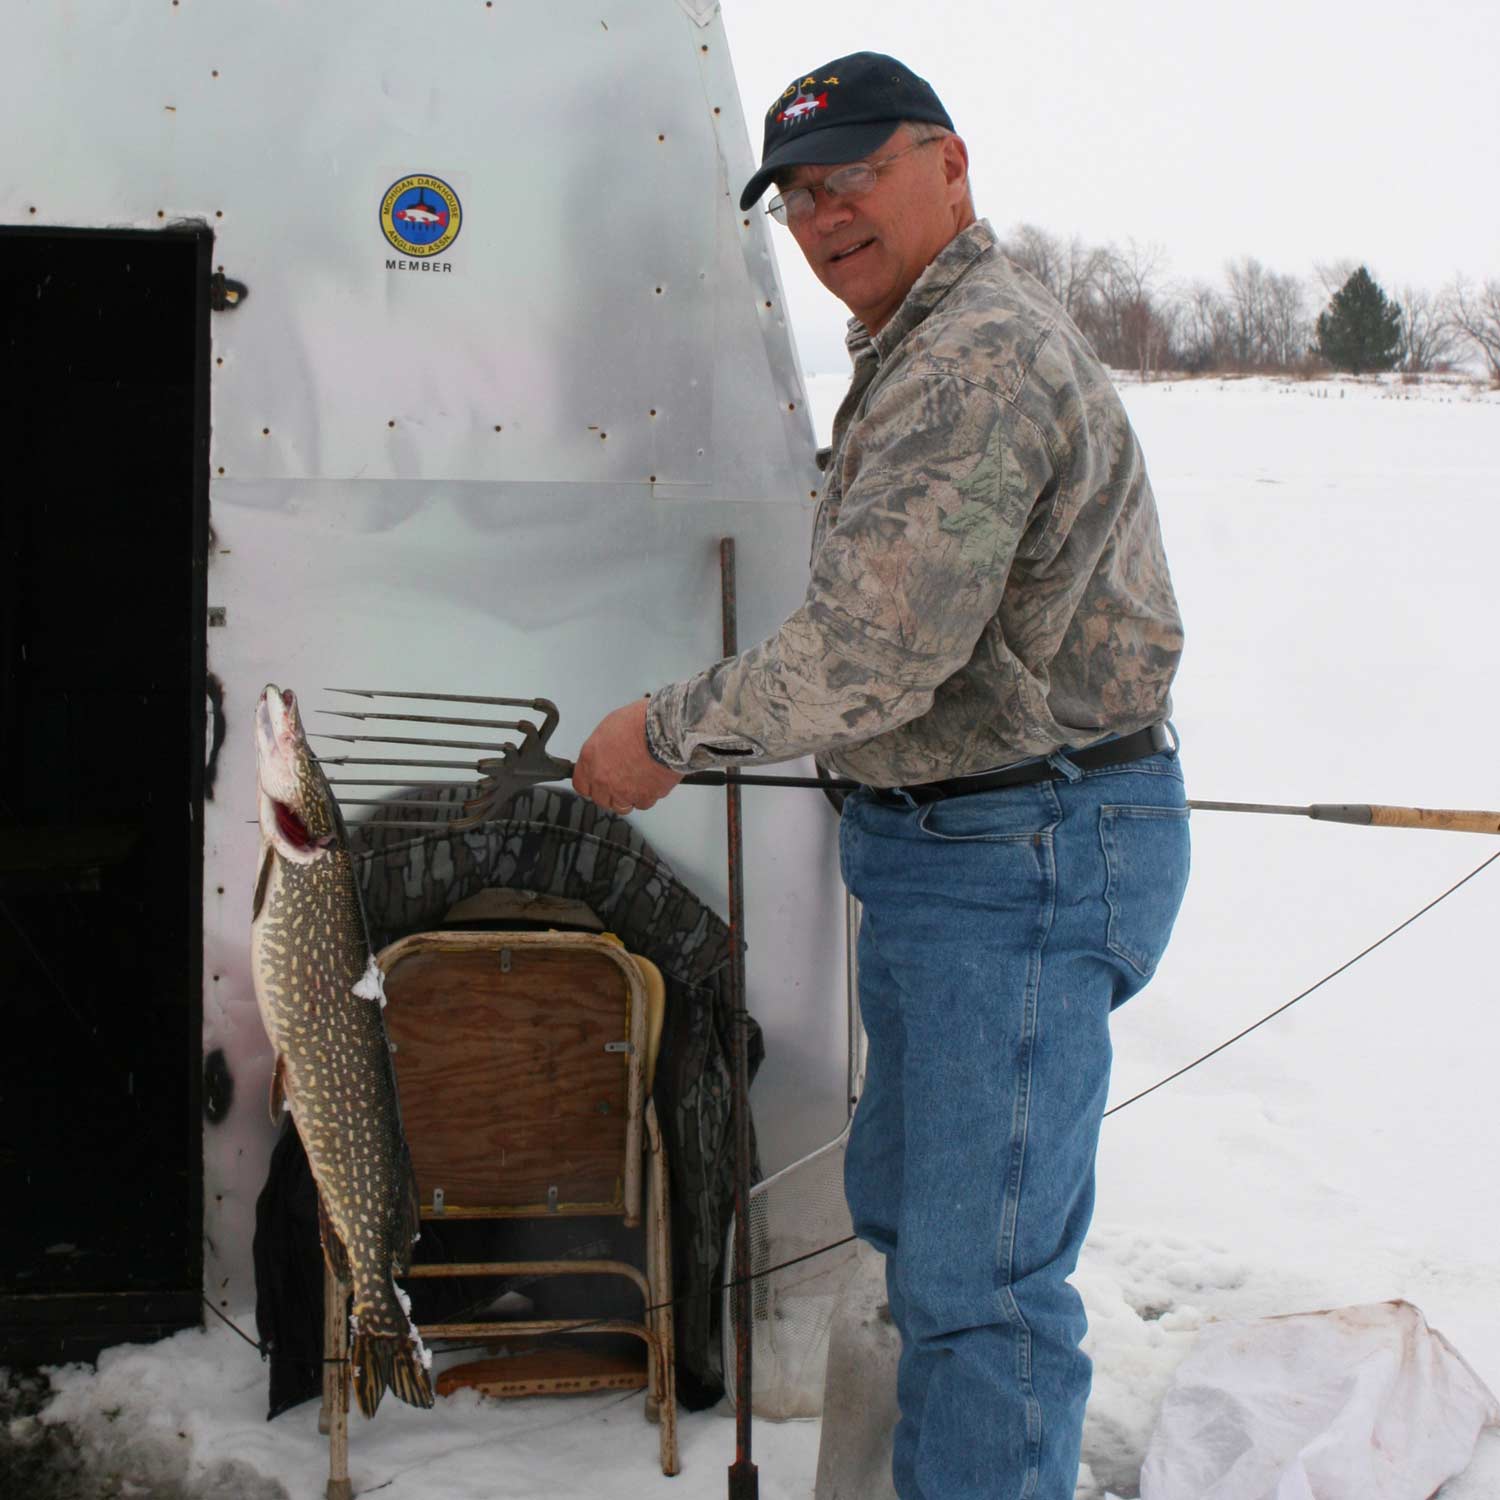 A man stands next to a large shed and an ice fishing hole.